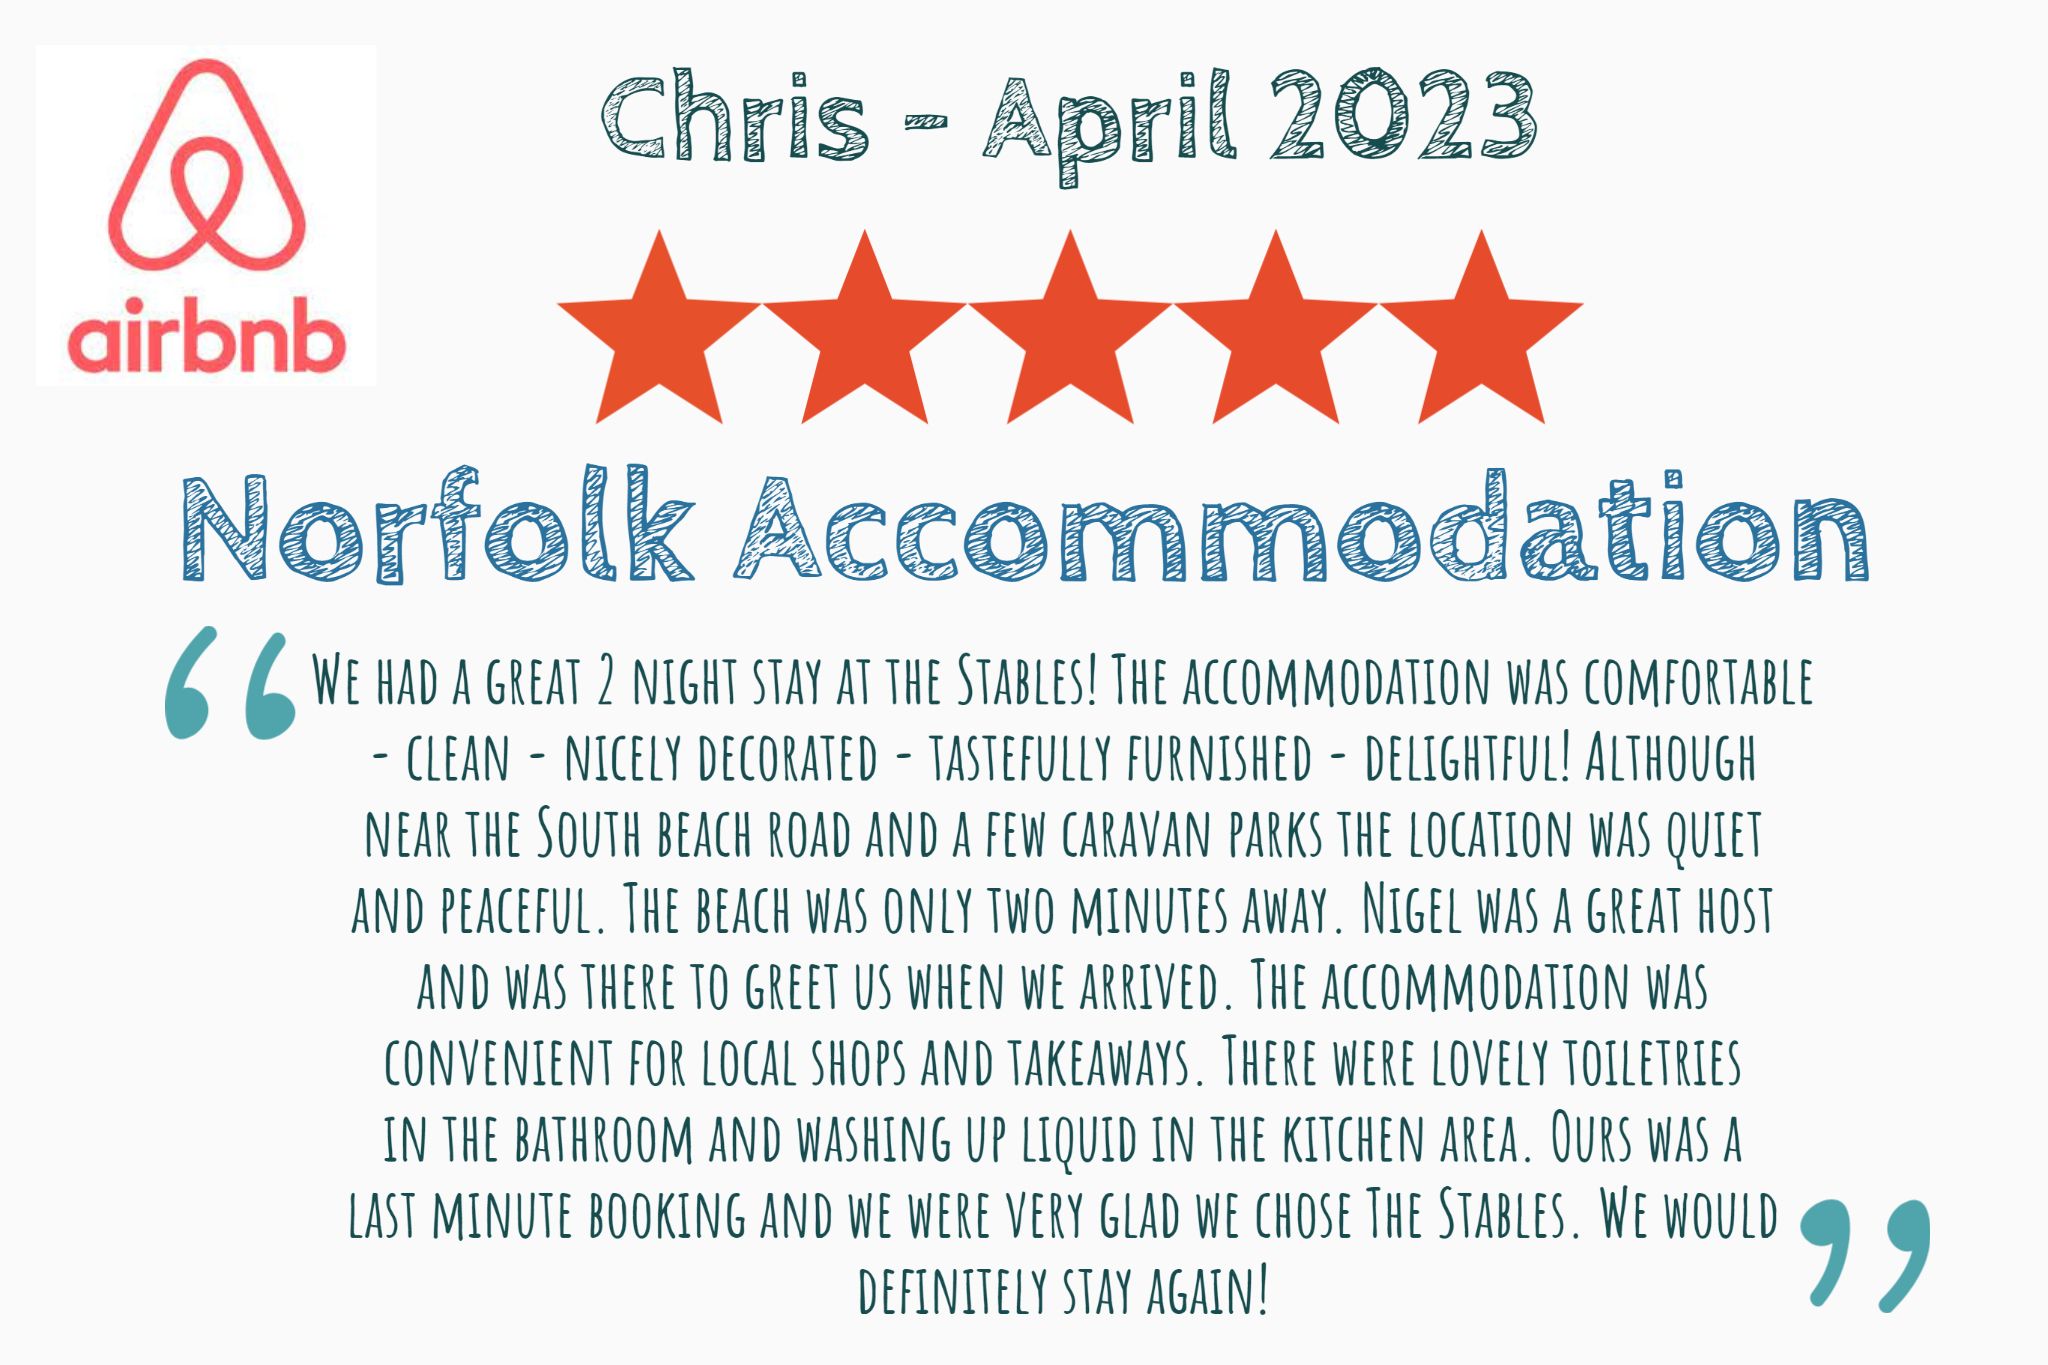 Chris airbnb review five star the stables